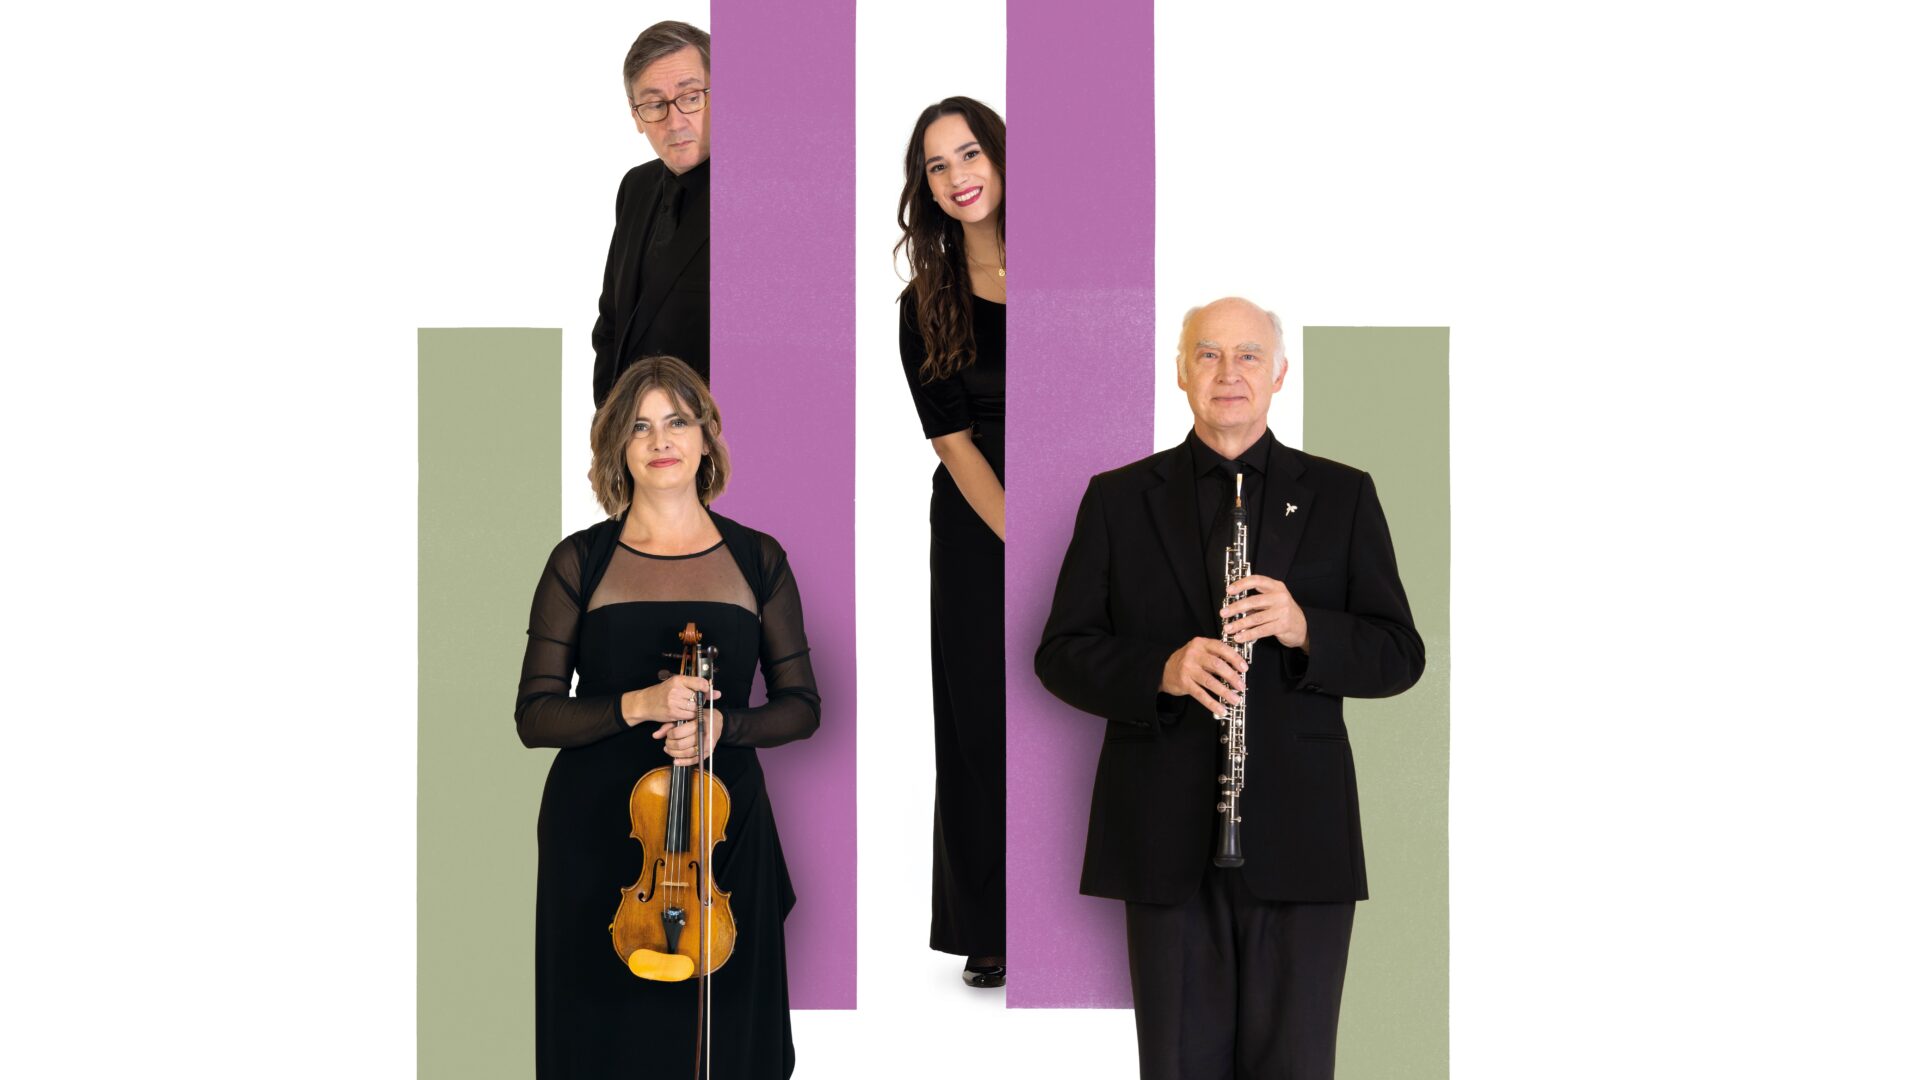 Four BSO musicians, one holding a violin and one holding a clarinet